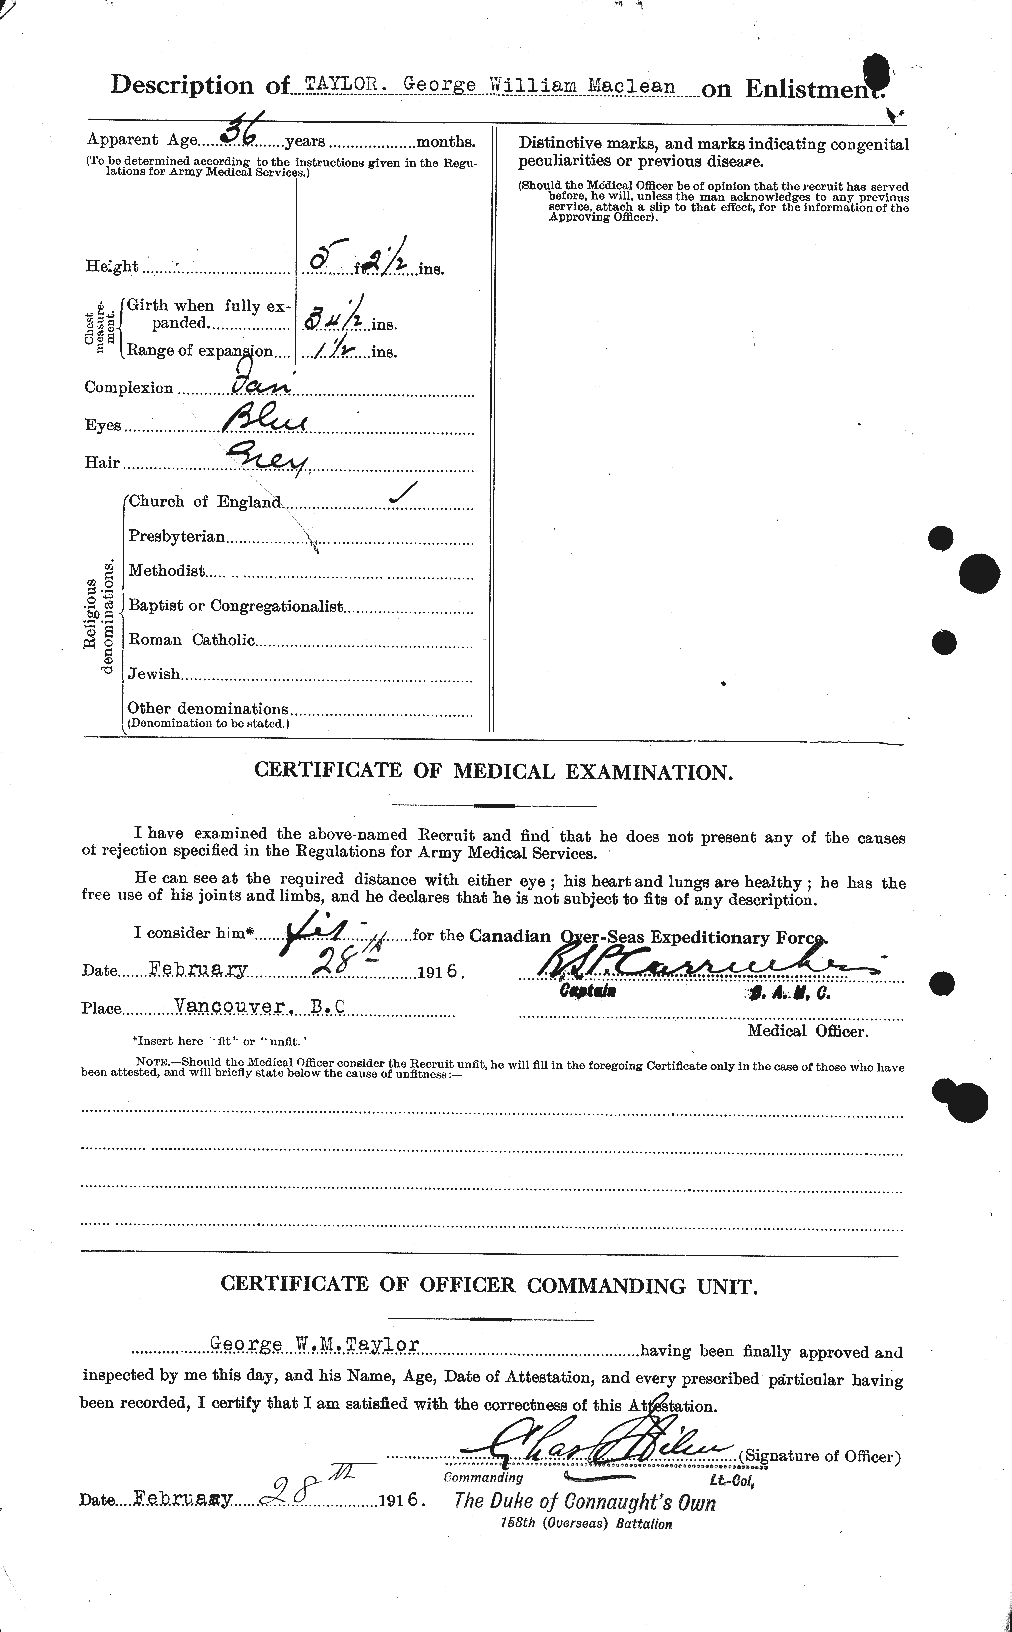 Personnel Records of the First World War - CEF 626372b